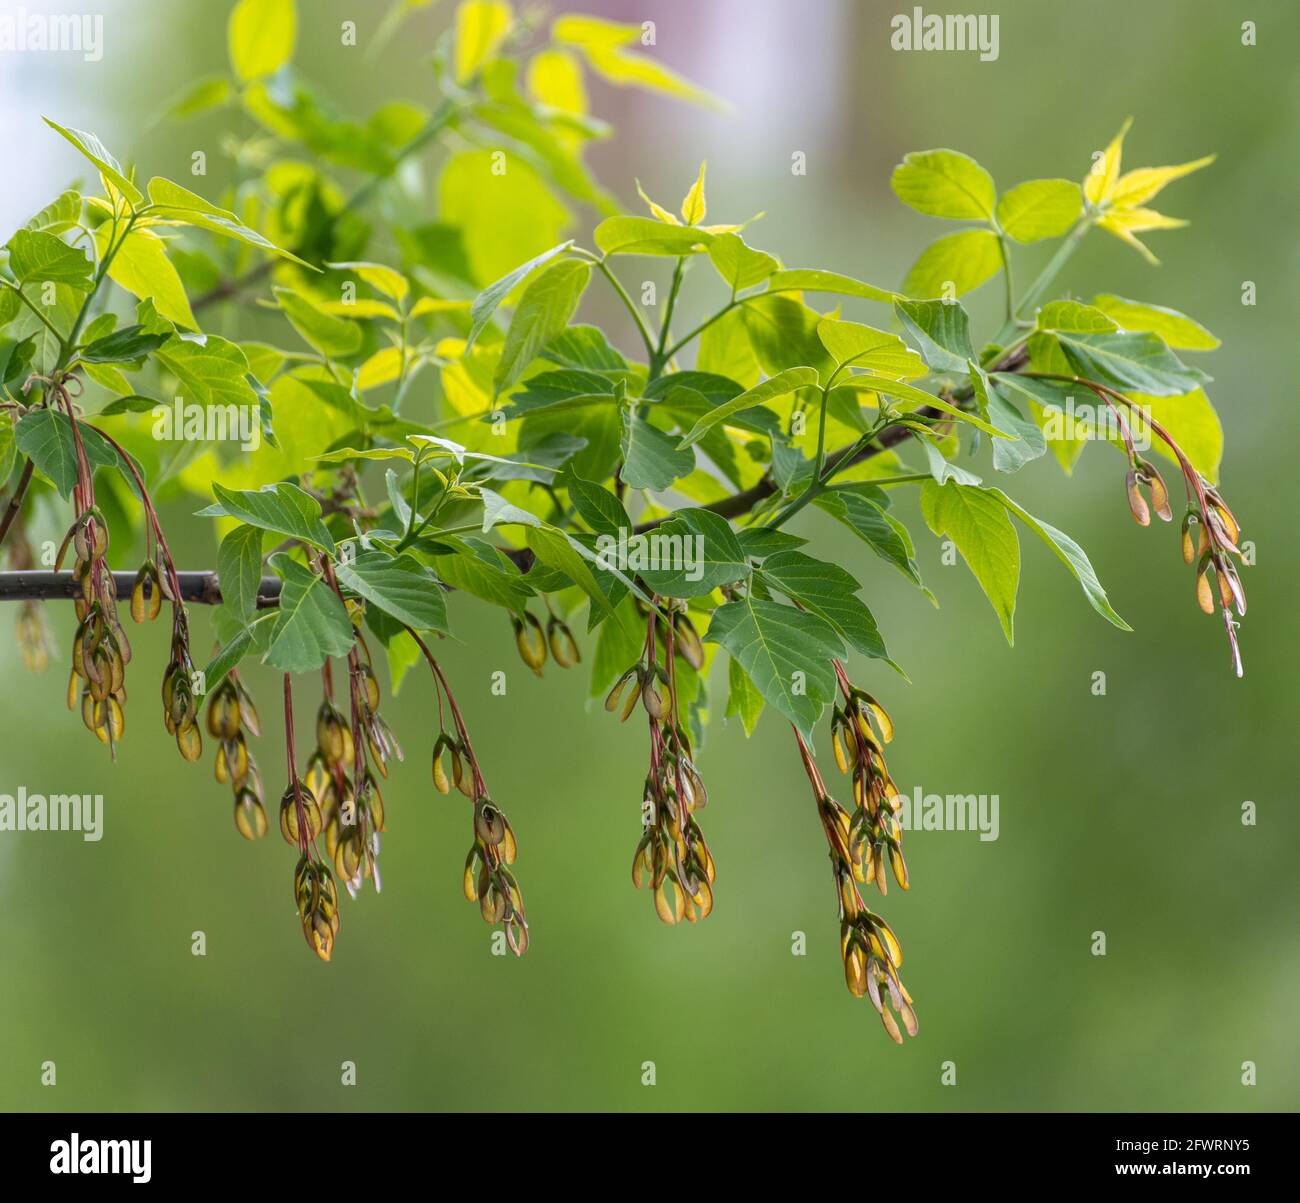 Ash-leaved maple twig with young spring leaves Stock Photo